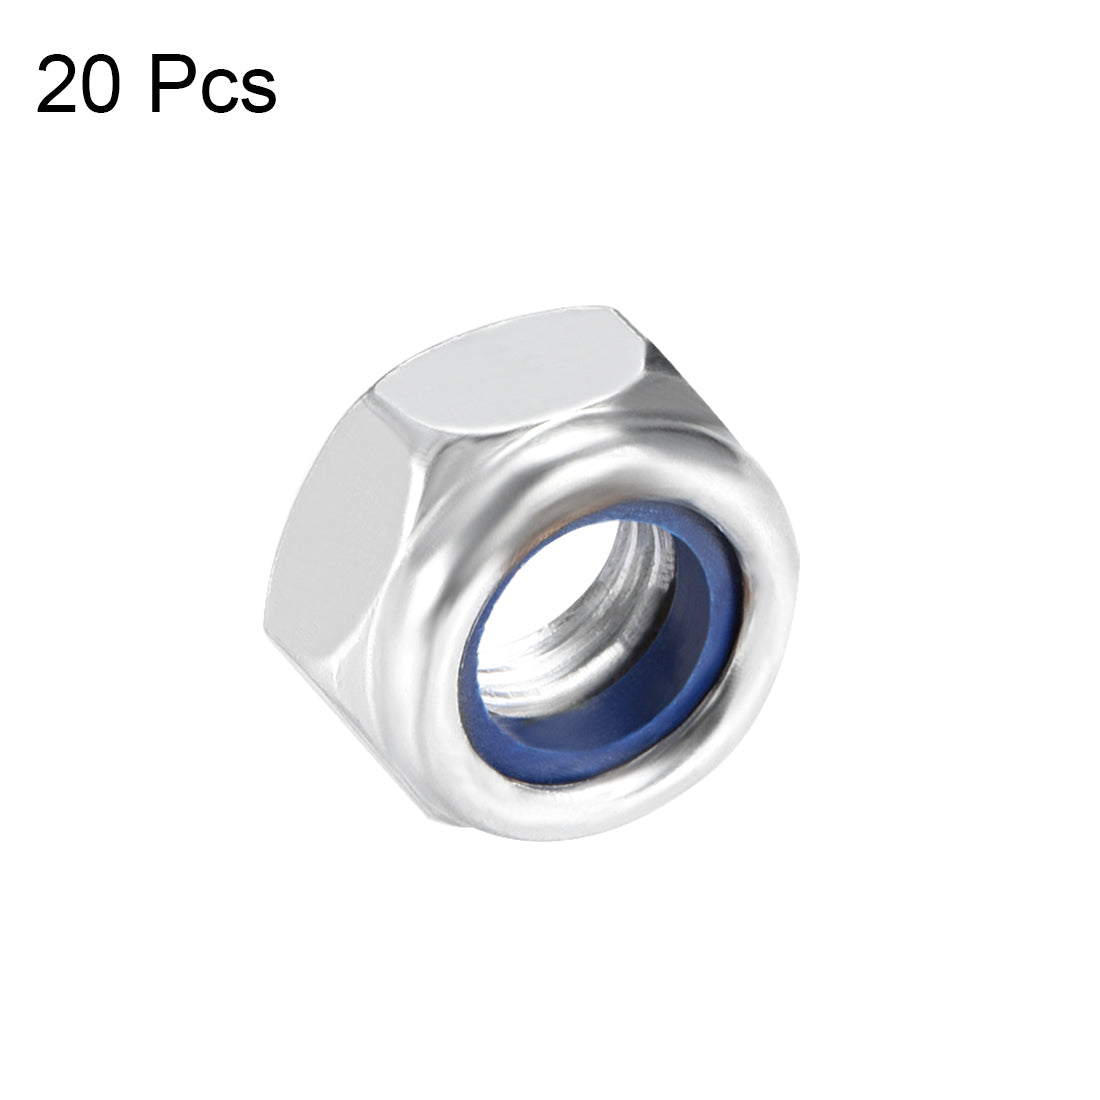 uxcell Uxcell M8 x1.25mm Nylon Insert Hex Lock Nuts, Carbon Steel White Zinc Plated, 20 Pcs